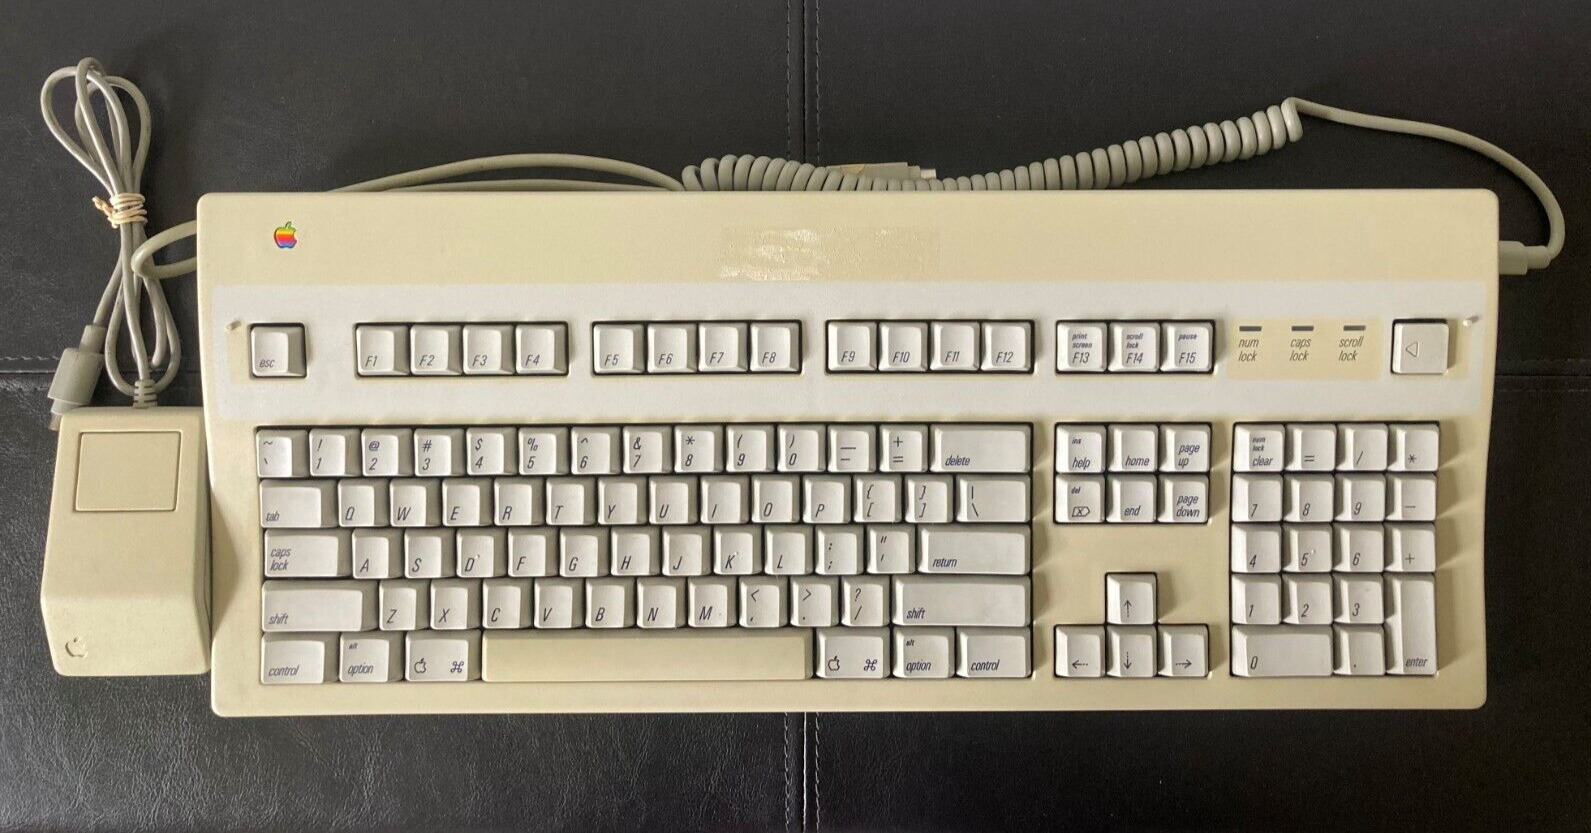 Vintage Apple M3501 Extended Keyboard II, ADB Mouse G5431 & cable